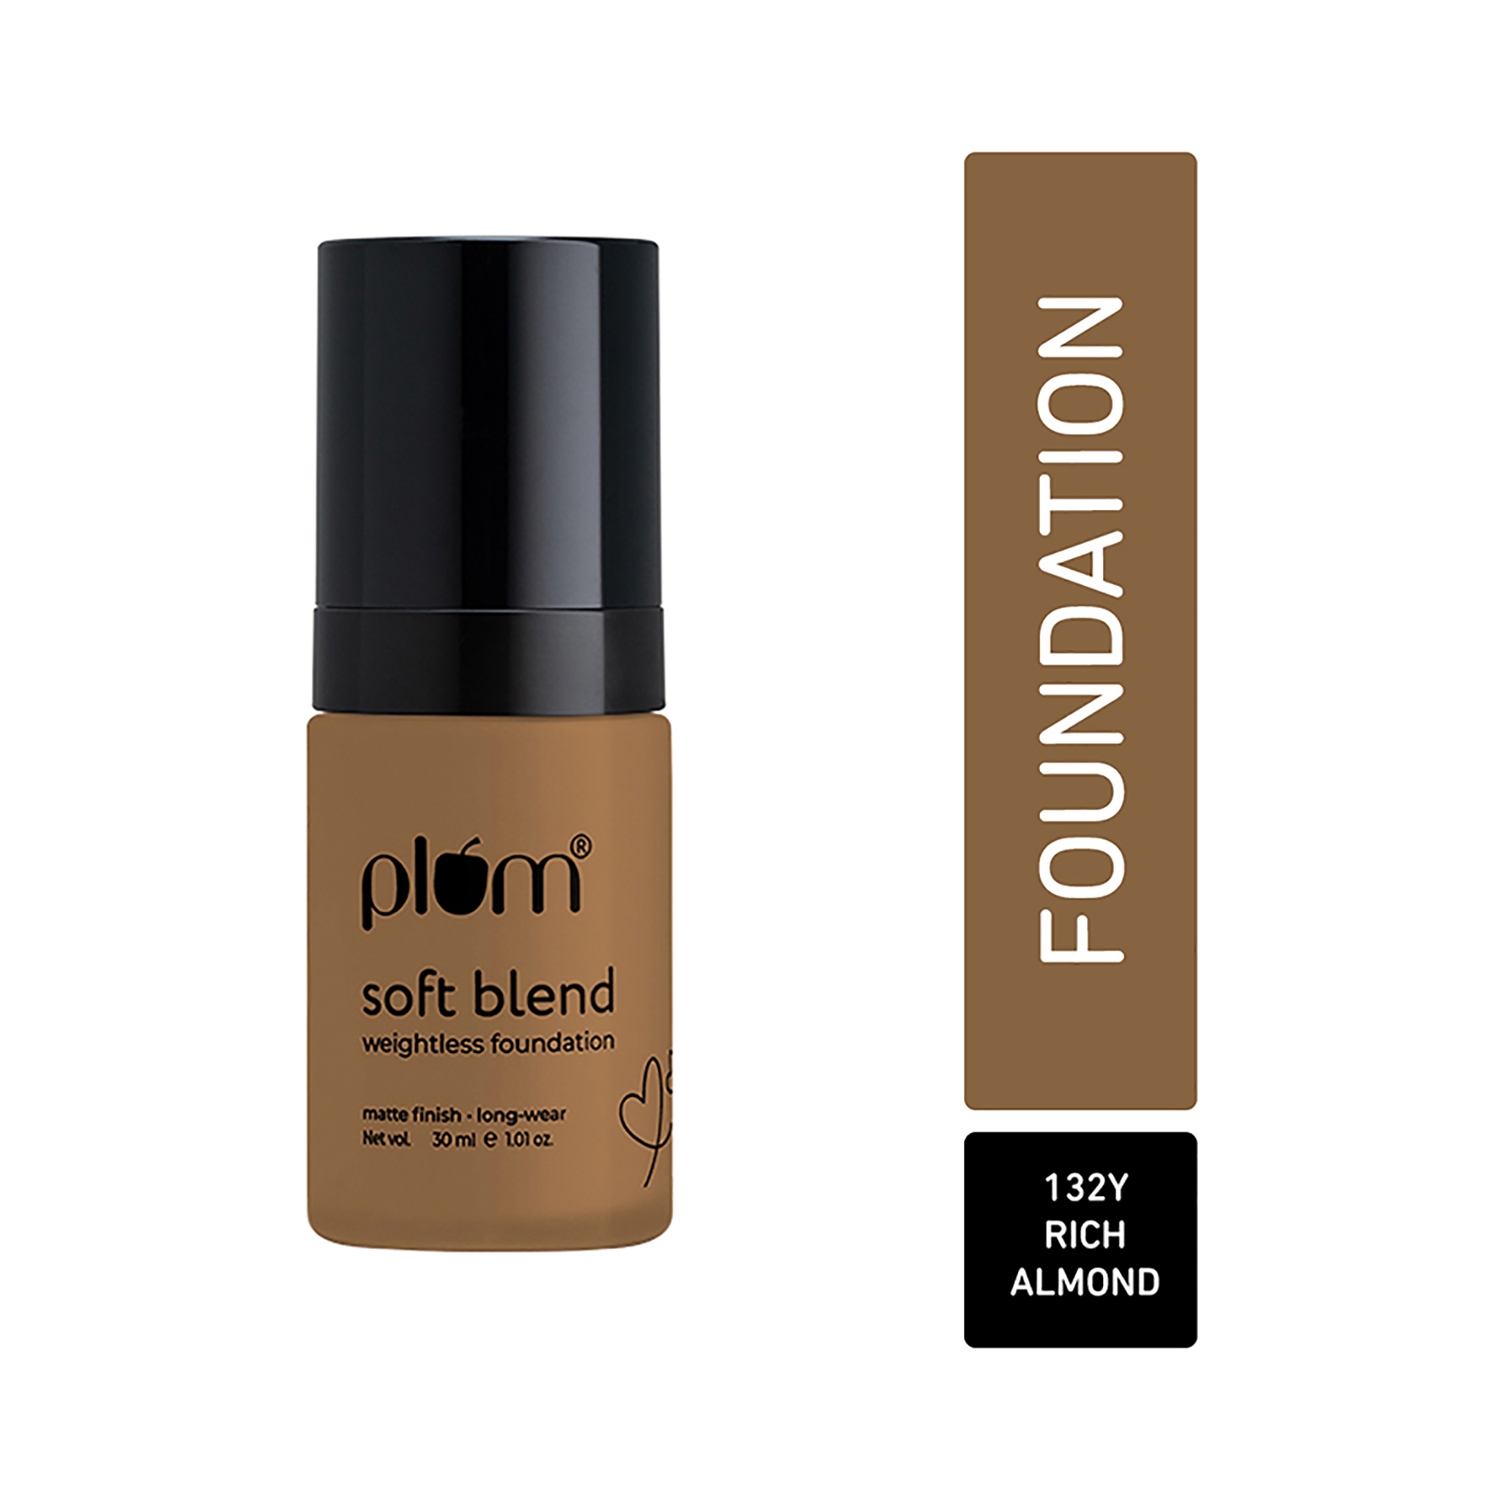 Plum | Plum Soft Blend Weightless Foundation SPF 15 with Hyaluronic Acid - 132Y Rich Almond (30ml)